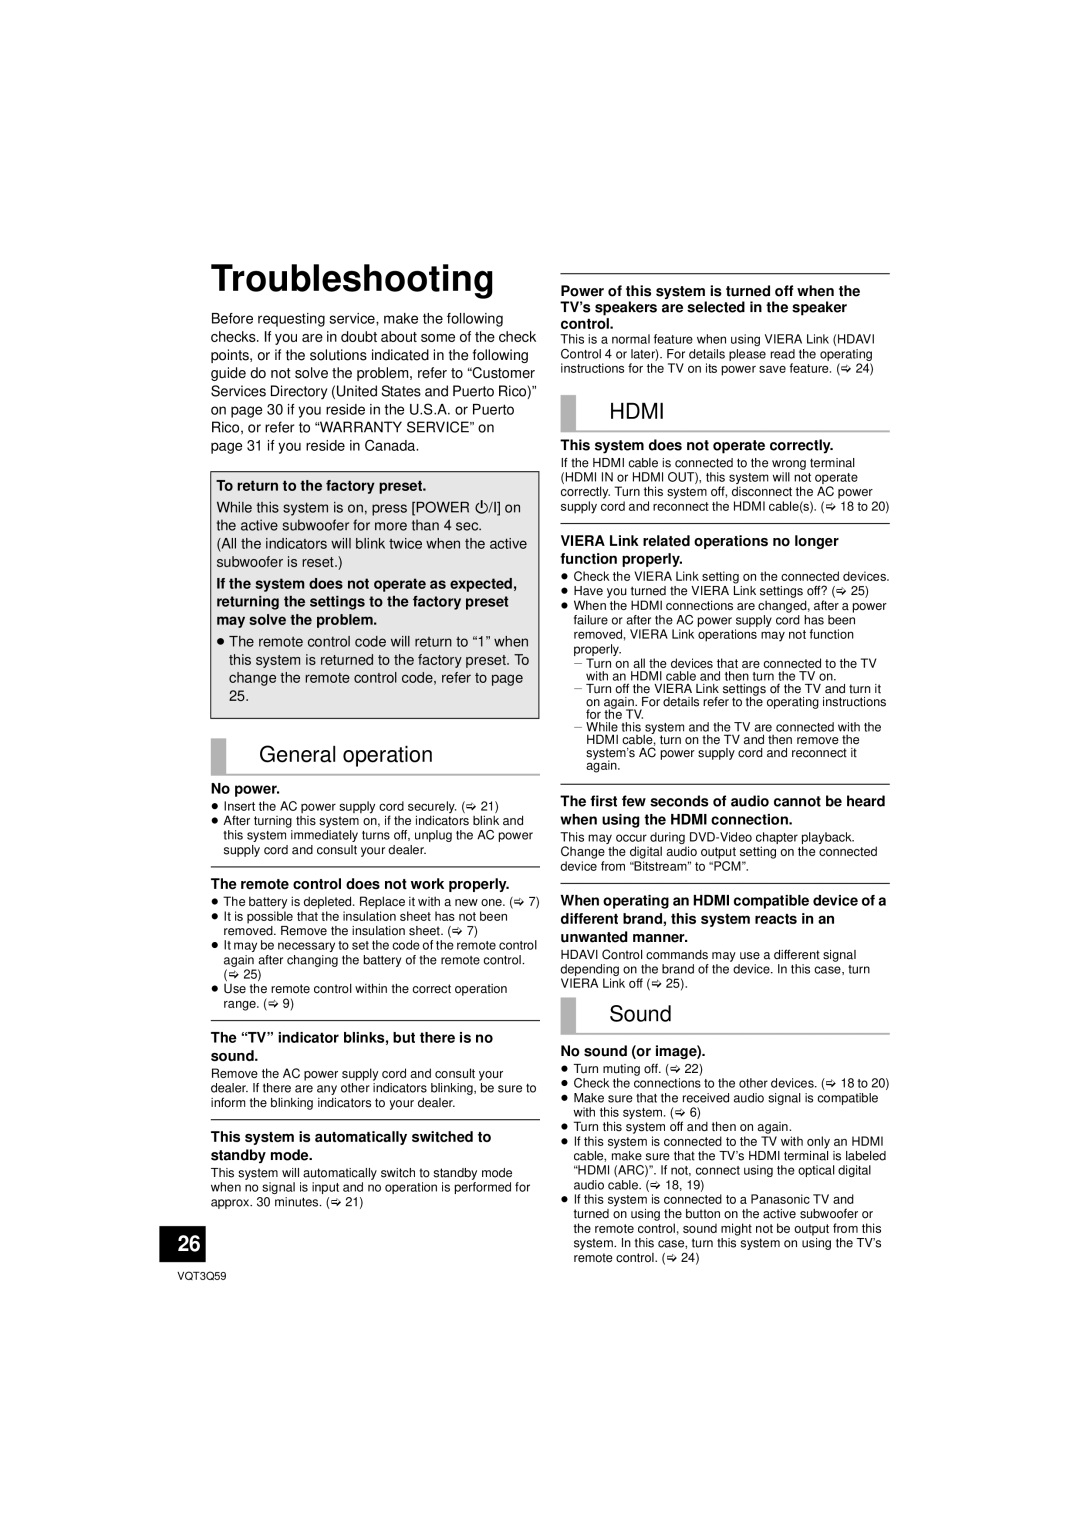 Panasonic SC-HTB15 owner manual Troubleshooting, General operation, Hdmi, Sound, To return to the factory preset, No power 